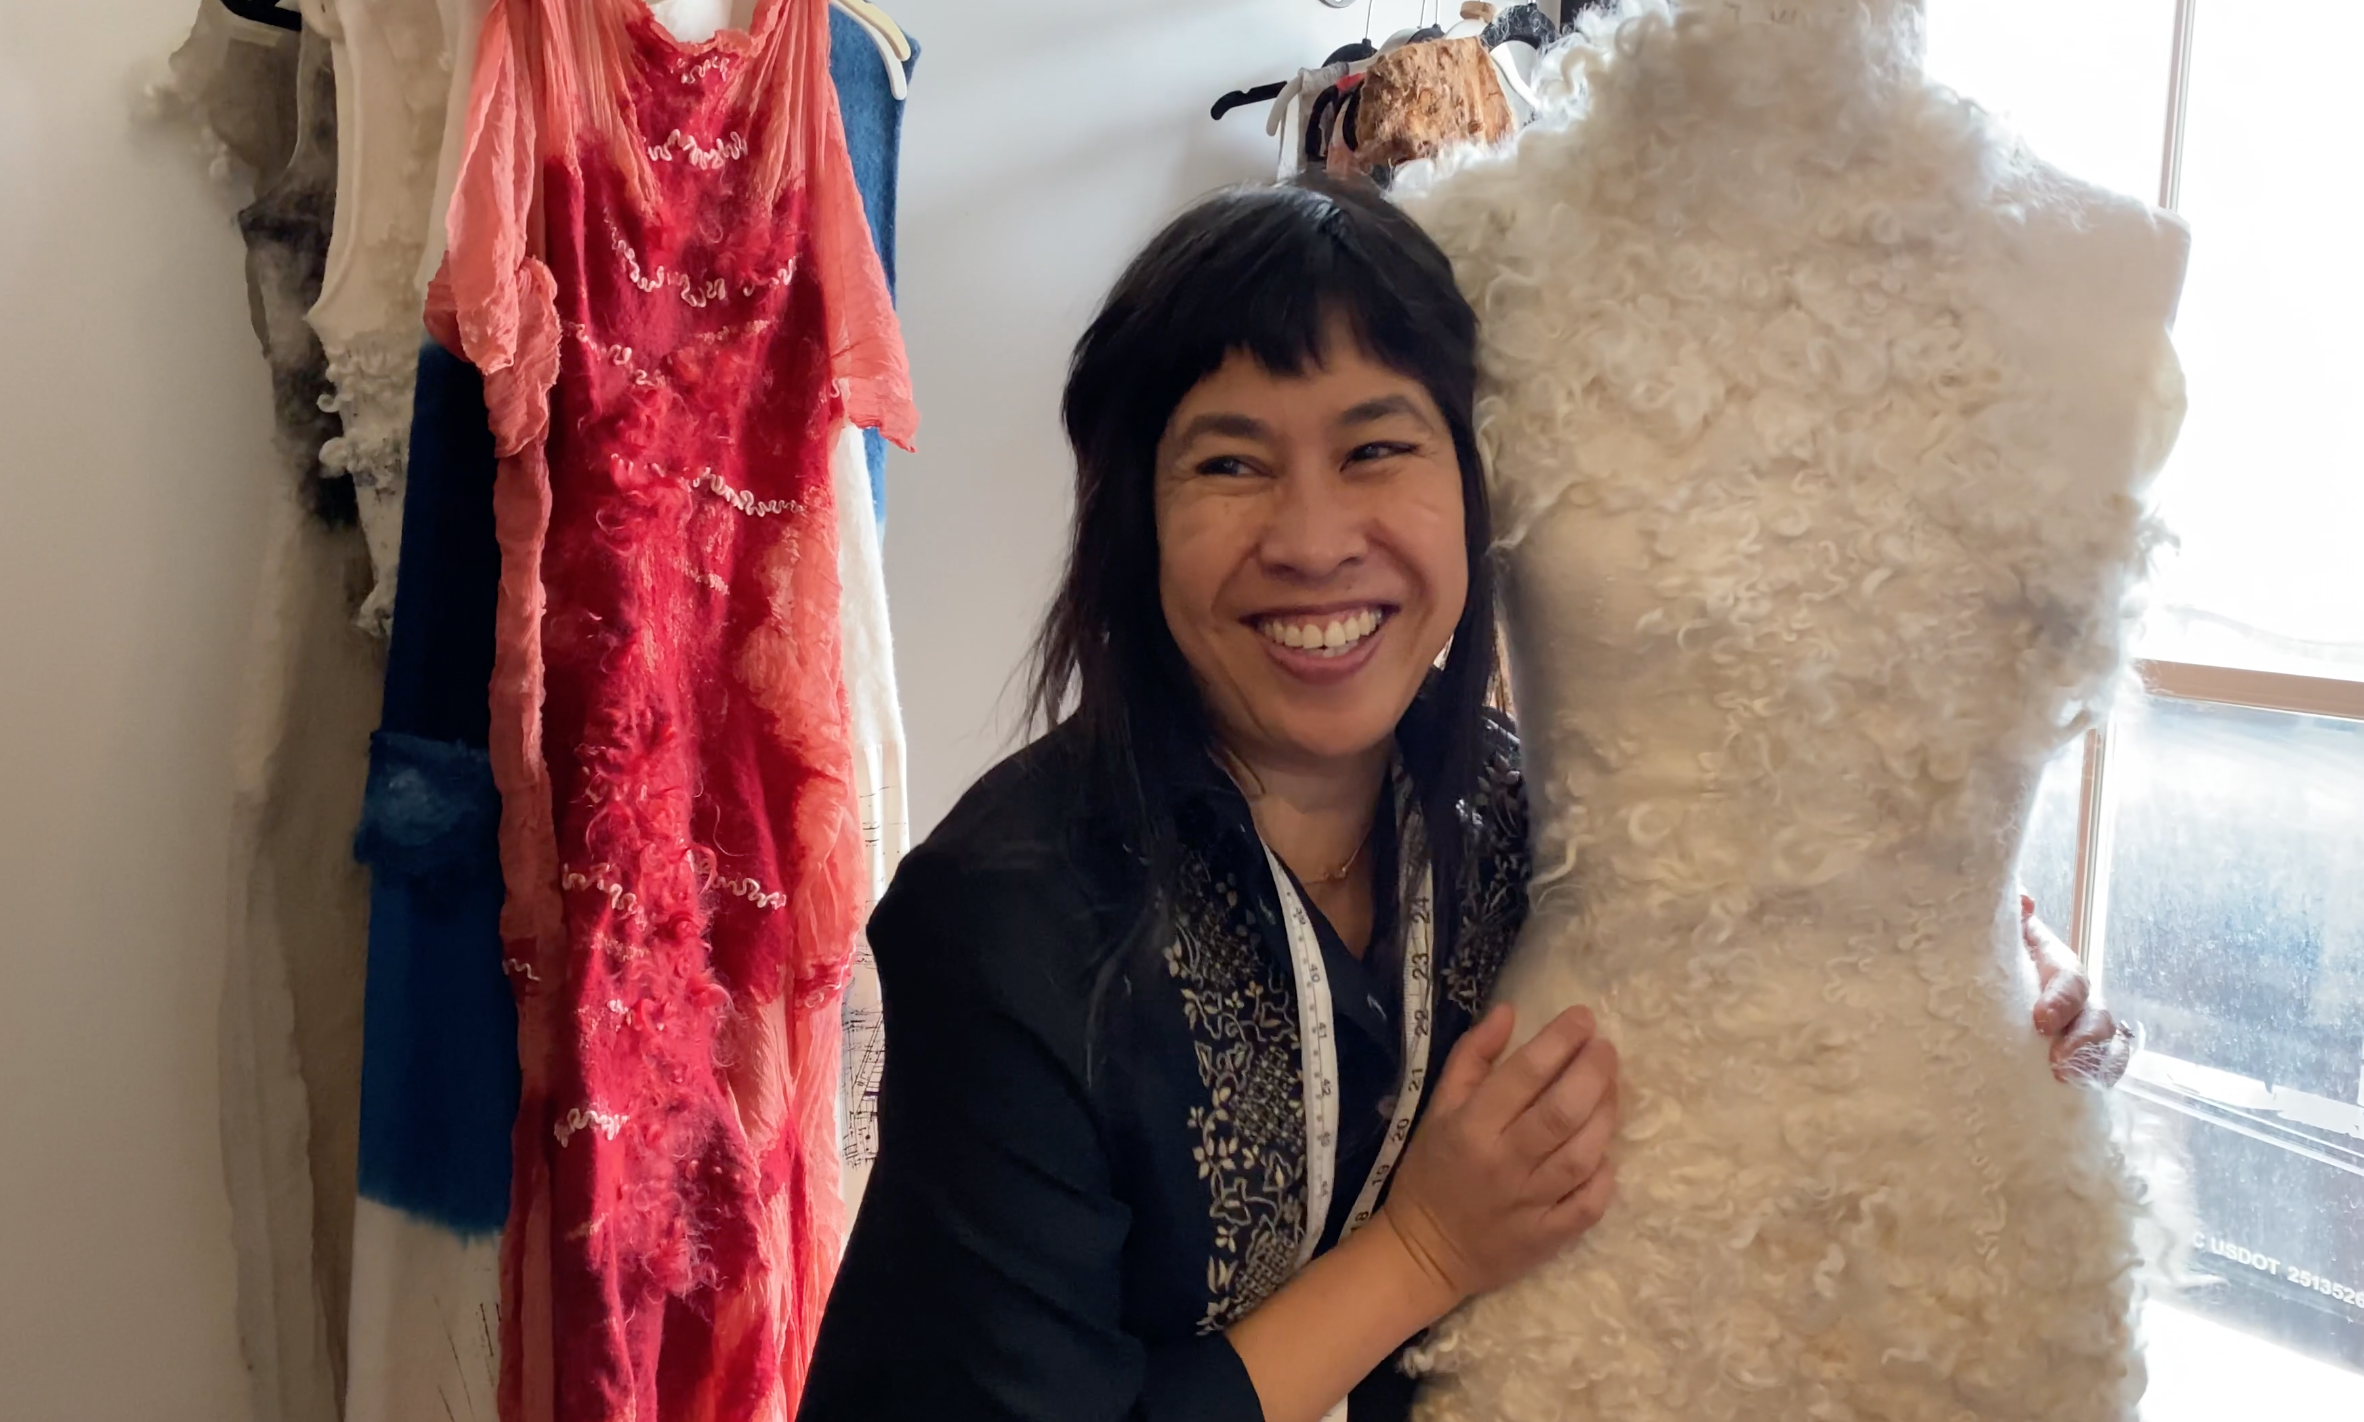 Celeste Malvar-Stewart poses with one of her custom wedding gowns, hugging it and the dress form it's on. She has short black hair and a big smile on her face, with a white tape measure draped around her neck. Behind her are several more of her dresses, including a bright red dress with a swirl of curly wool down the front